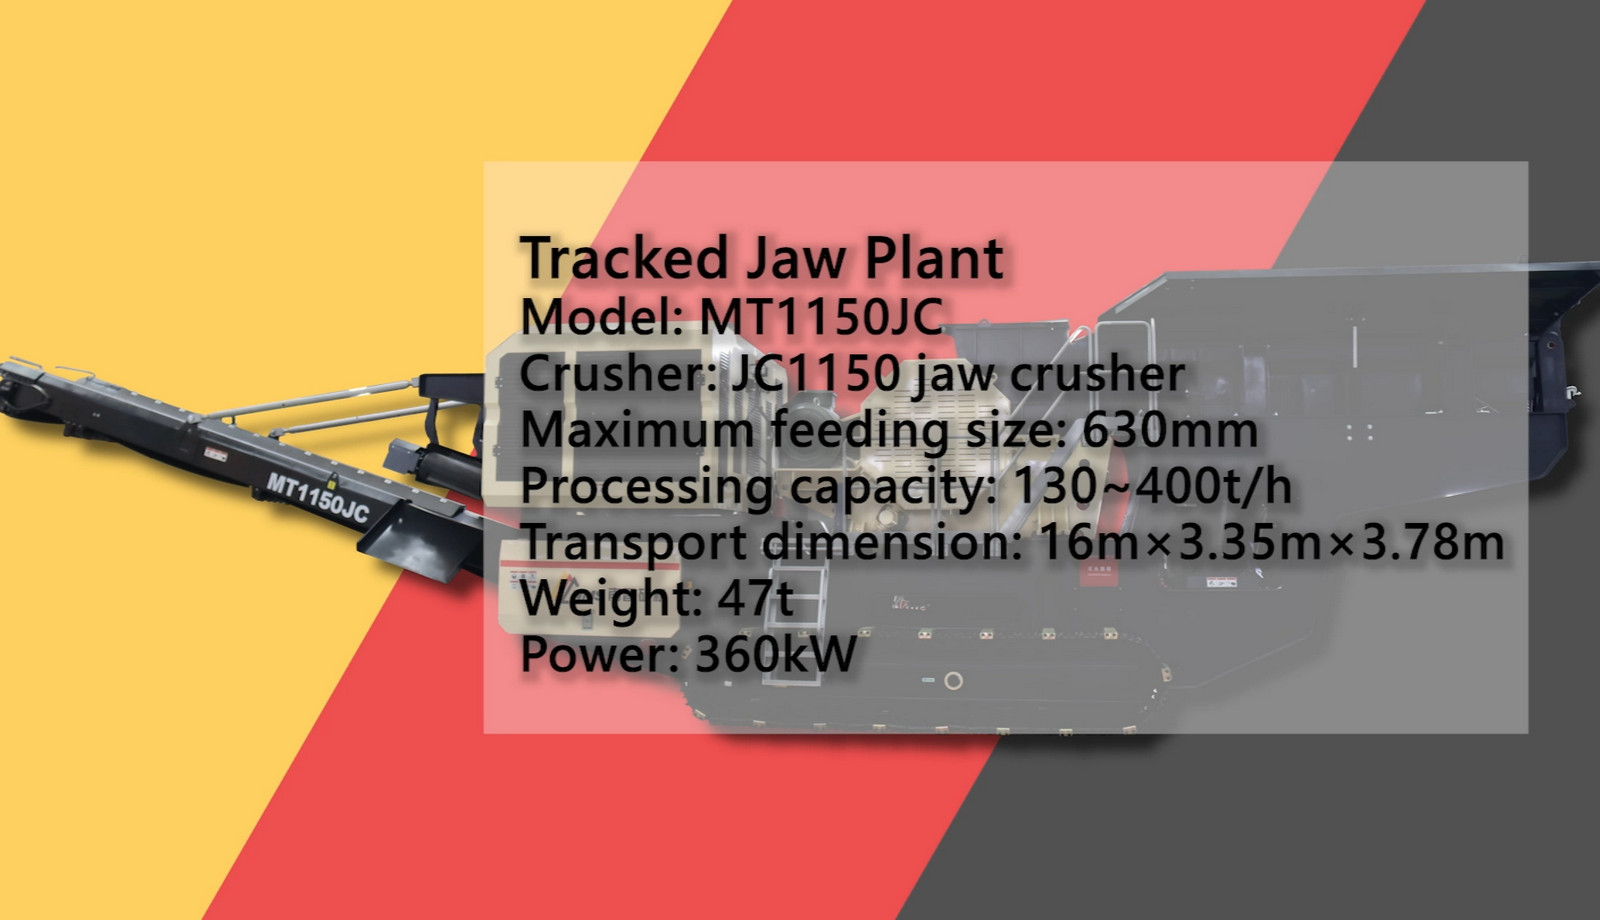 Introduction of MT1150JC Tracked Jaw Plant